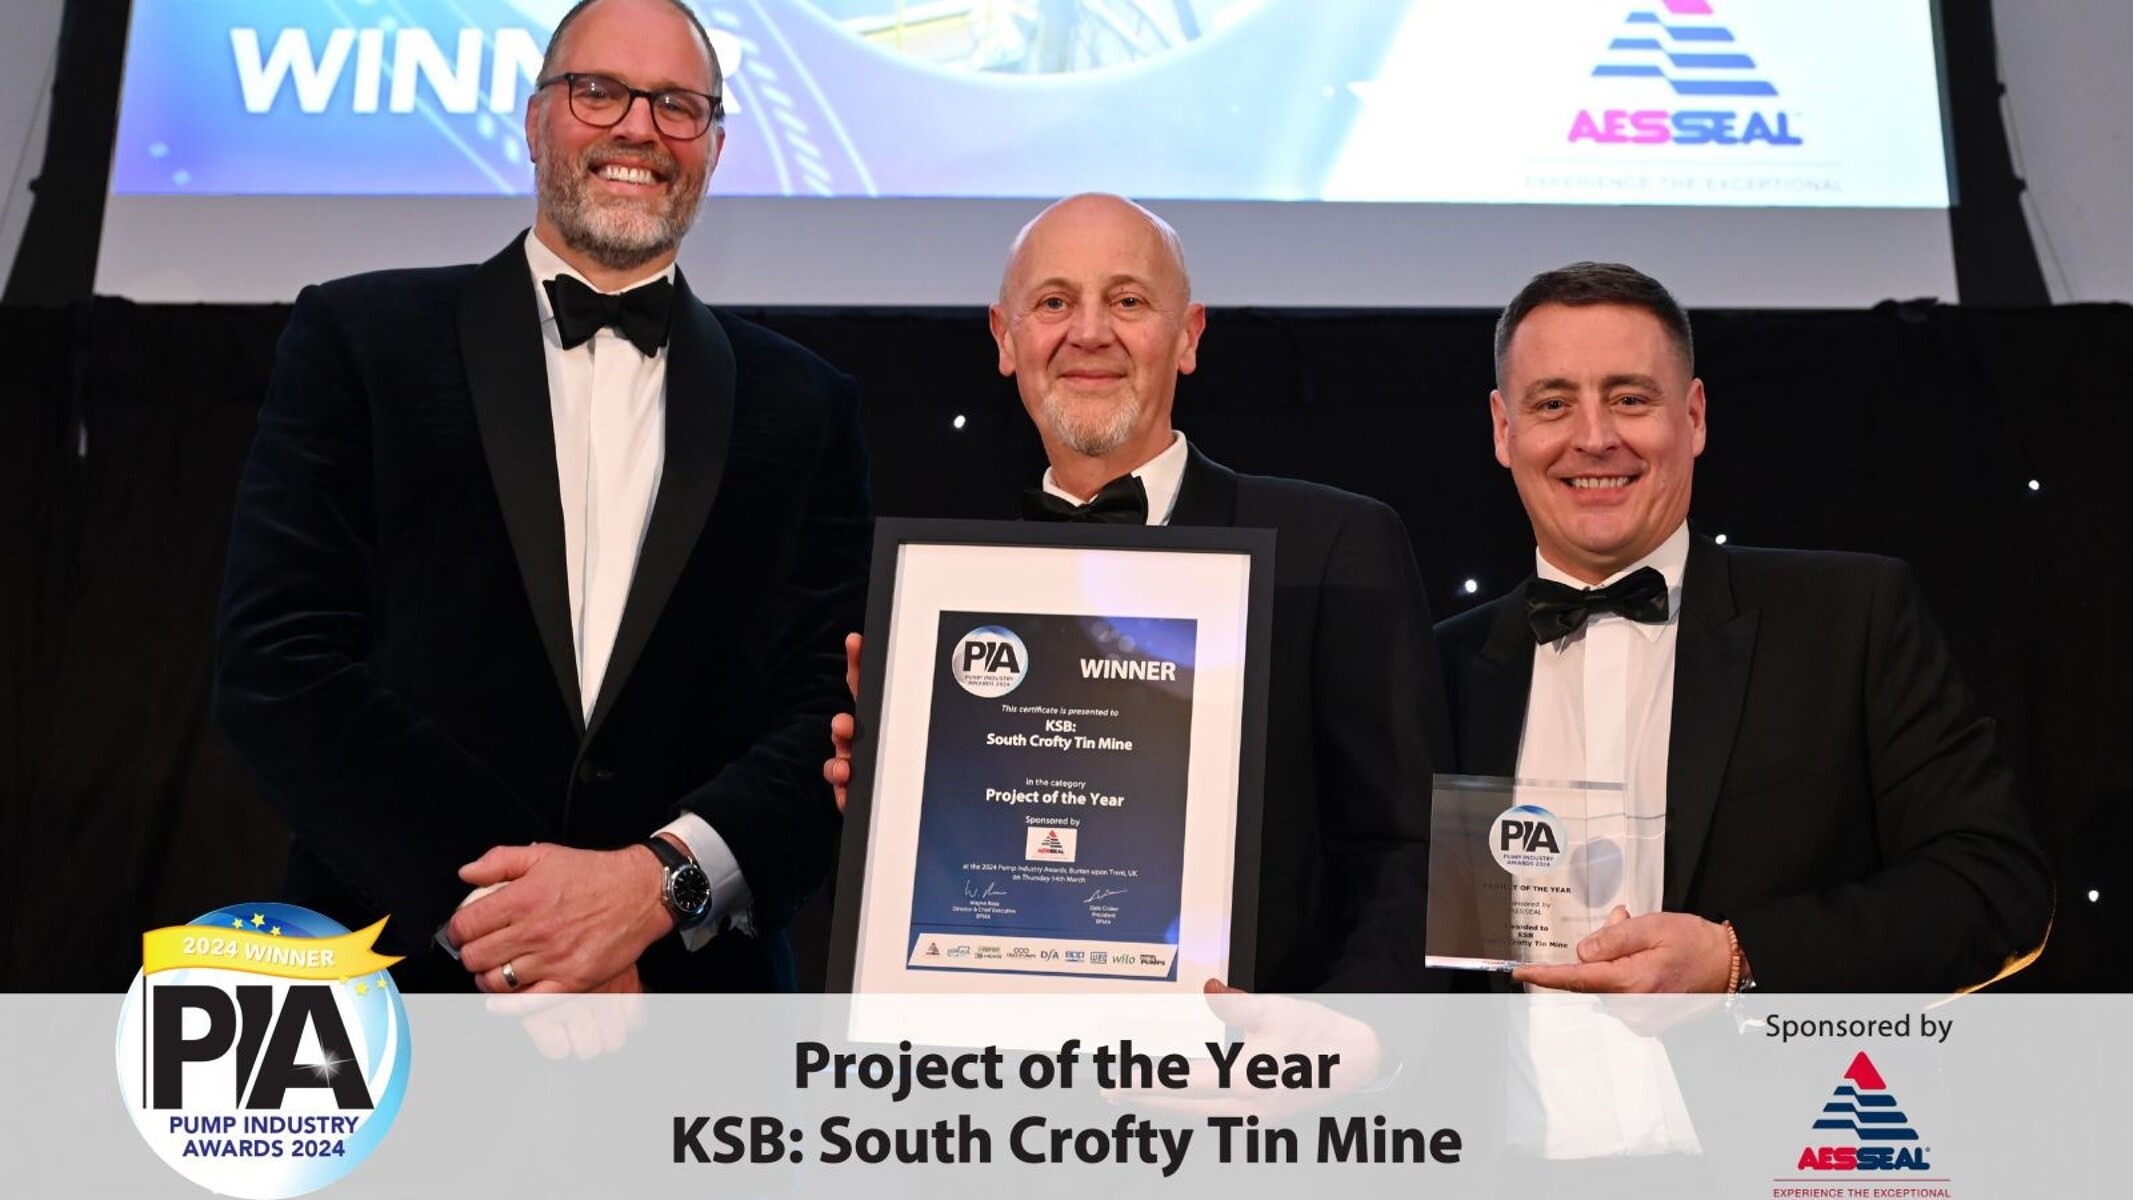 Pump Industry Awards: KSB win the Project of the Year award with South Crofty Tin Mine